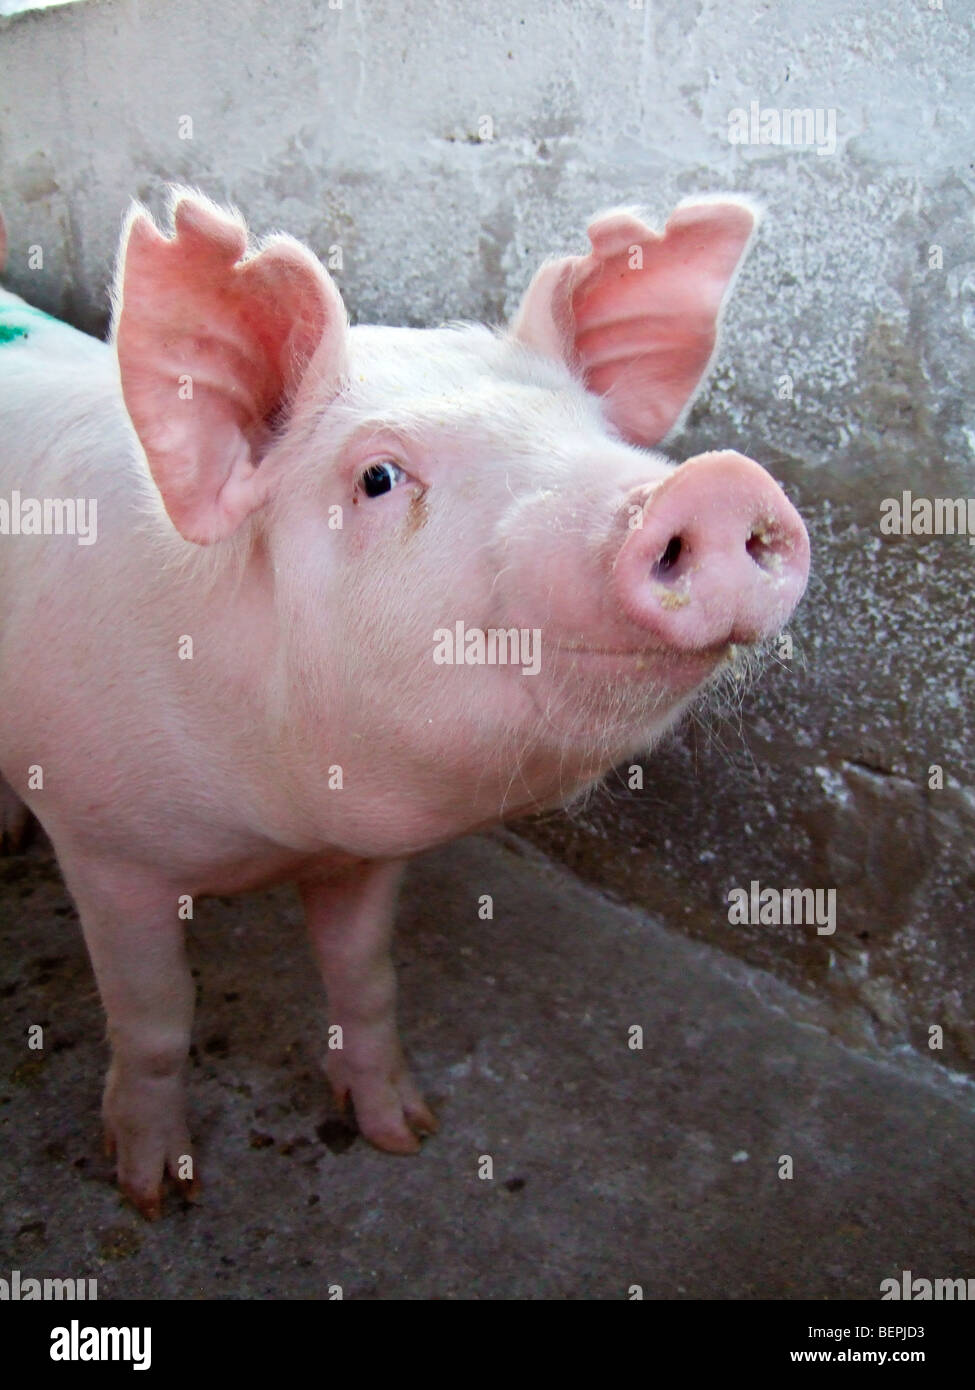 Large White commercial pig Kafue Zambia Africa Stock Photo